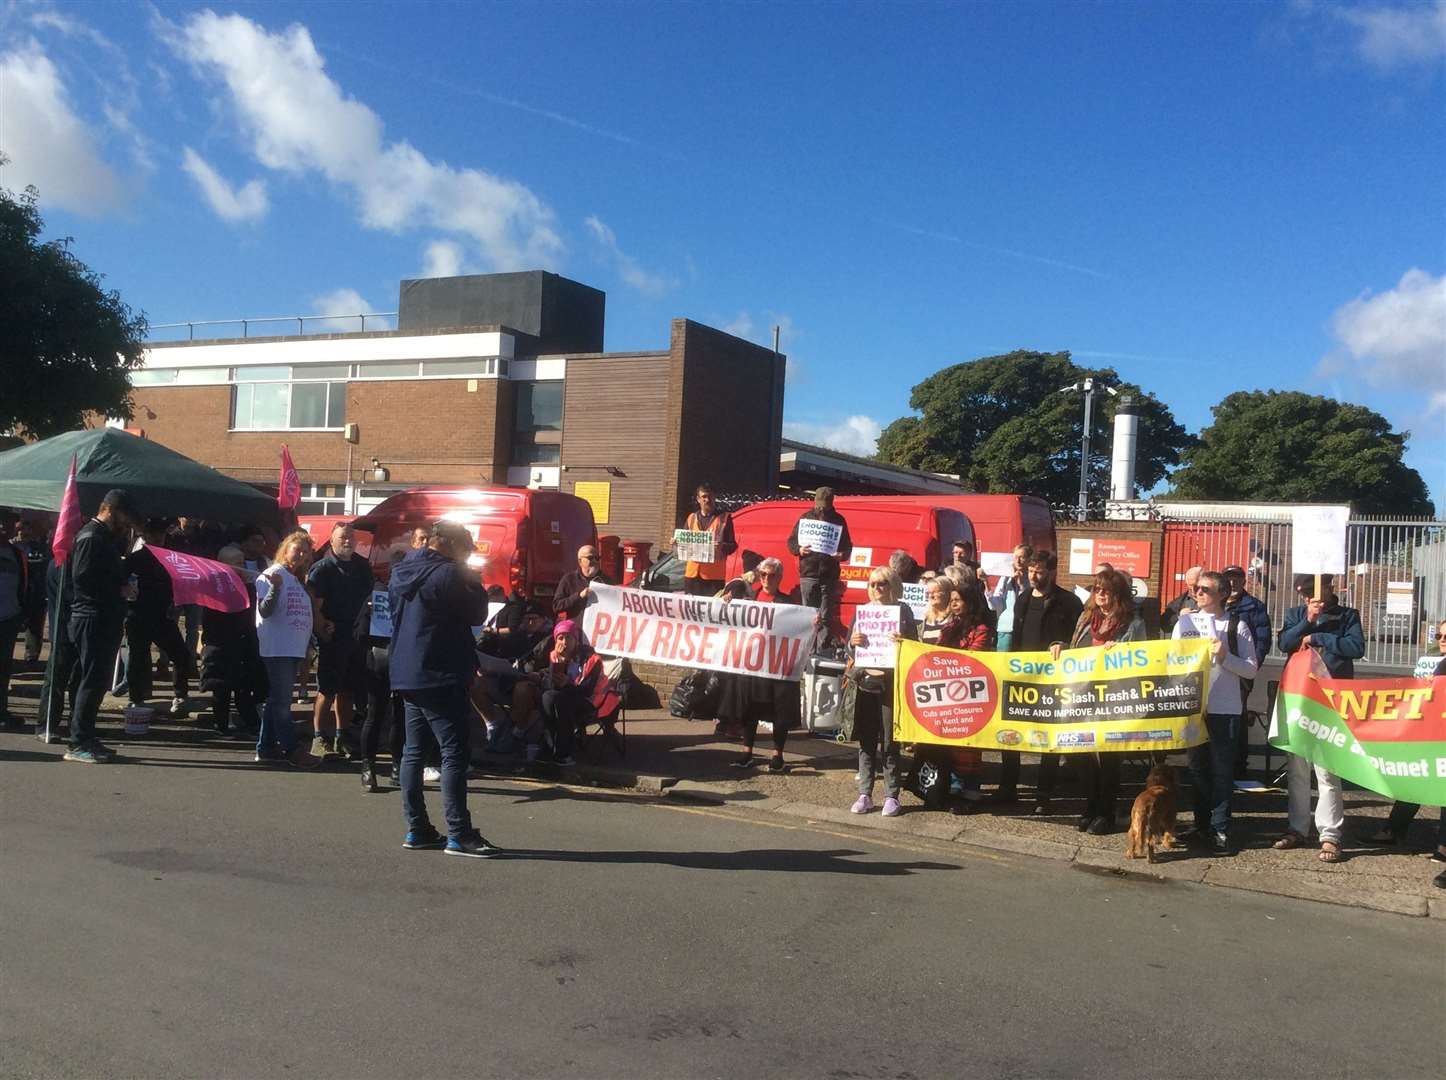 The 'Enough is Enough'; protest in Ramsgate